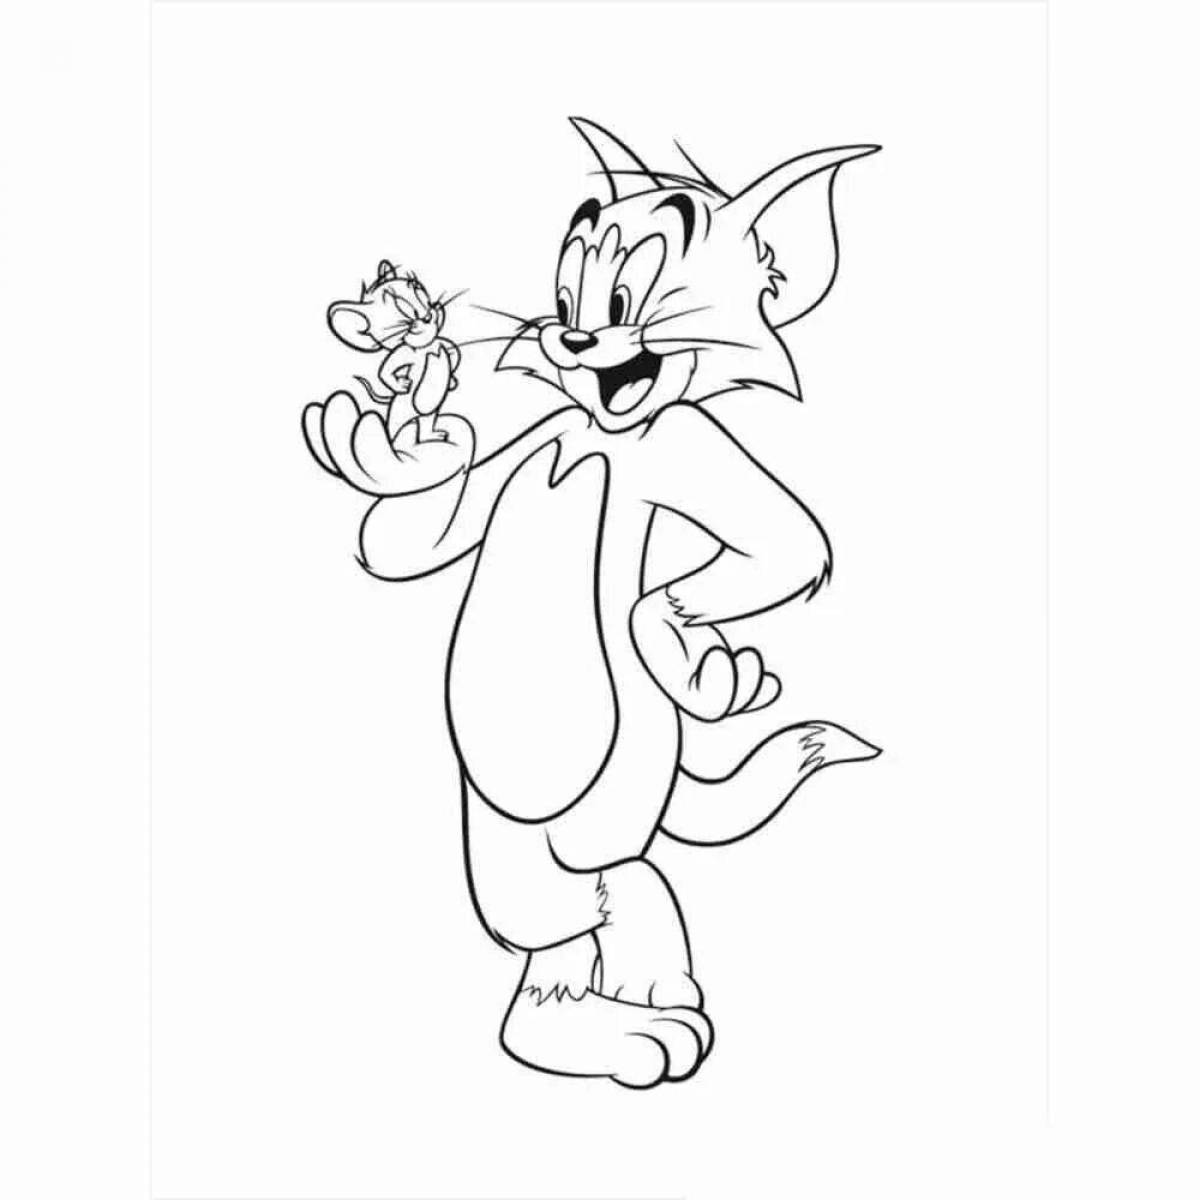 Animated tom and jerry coloring page